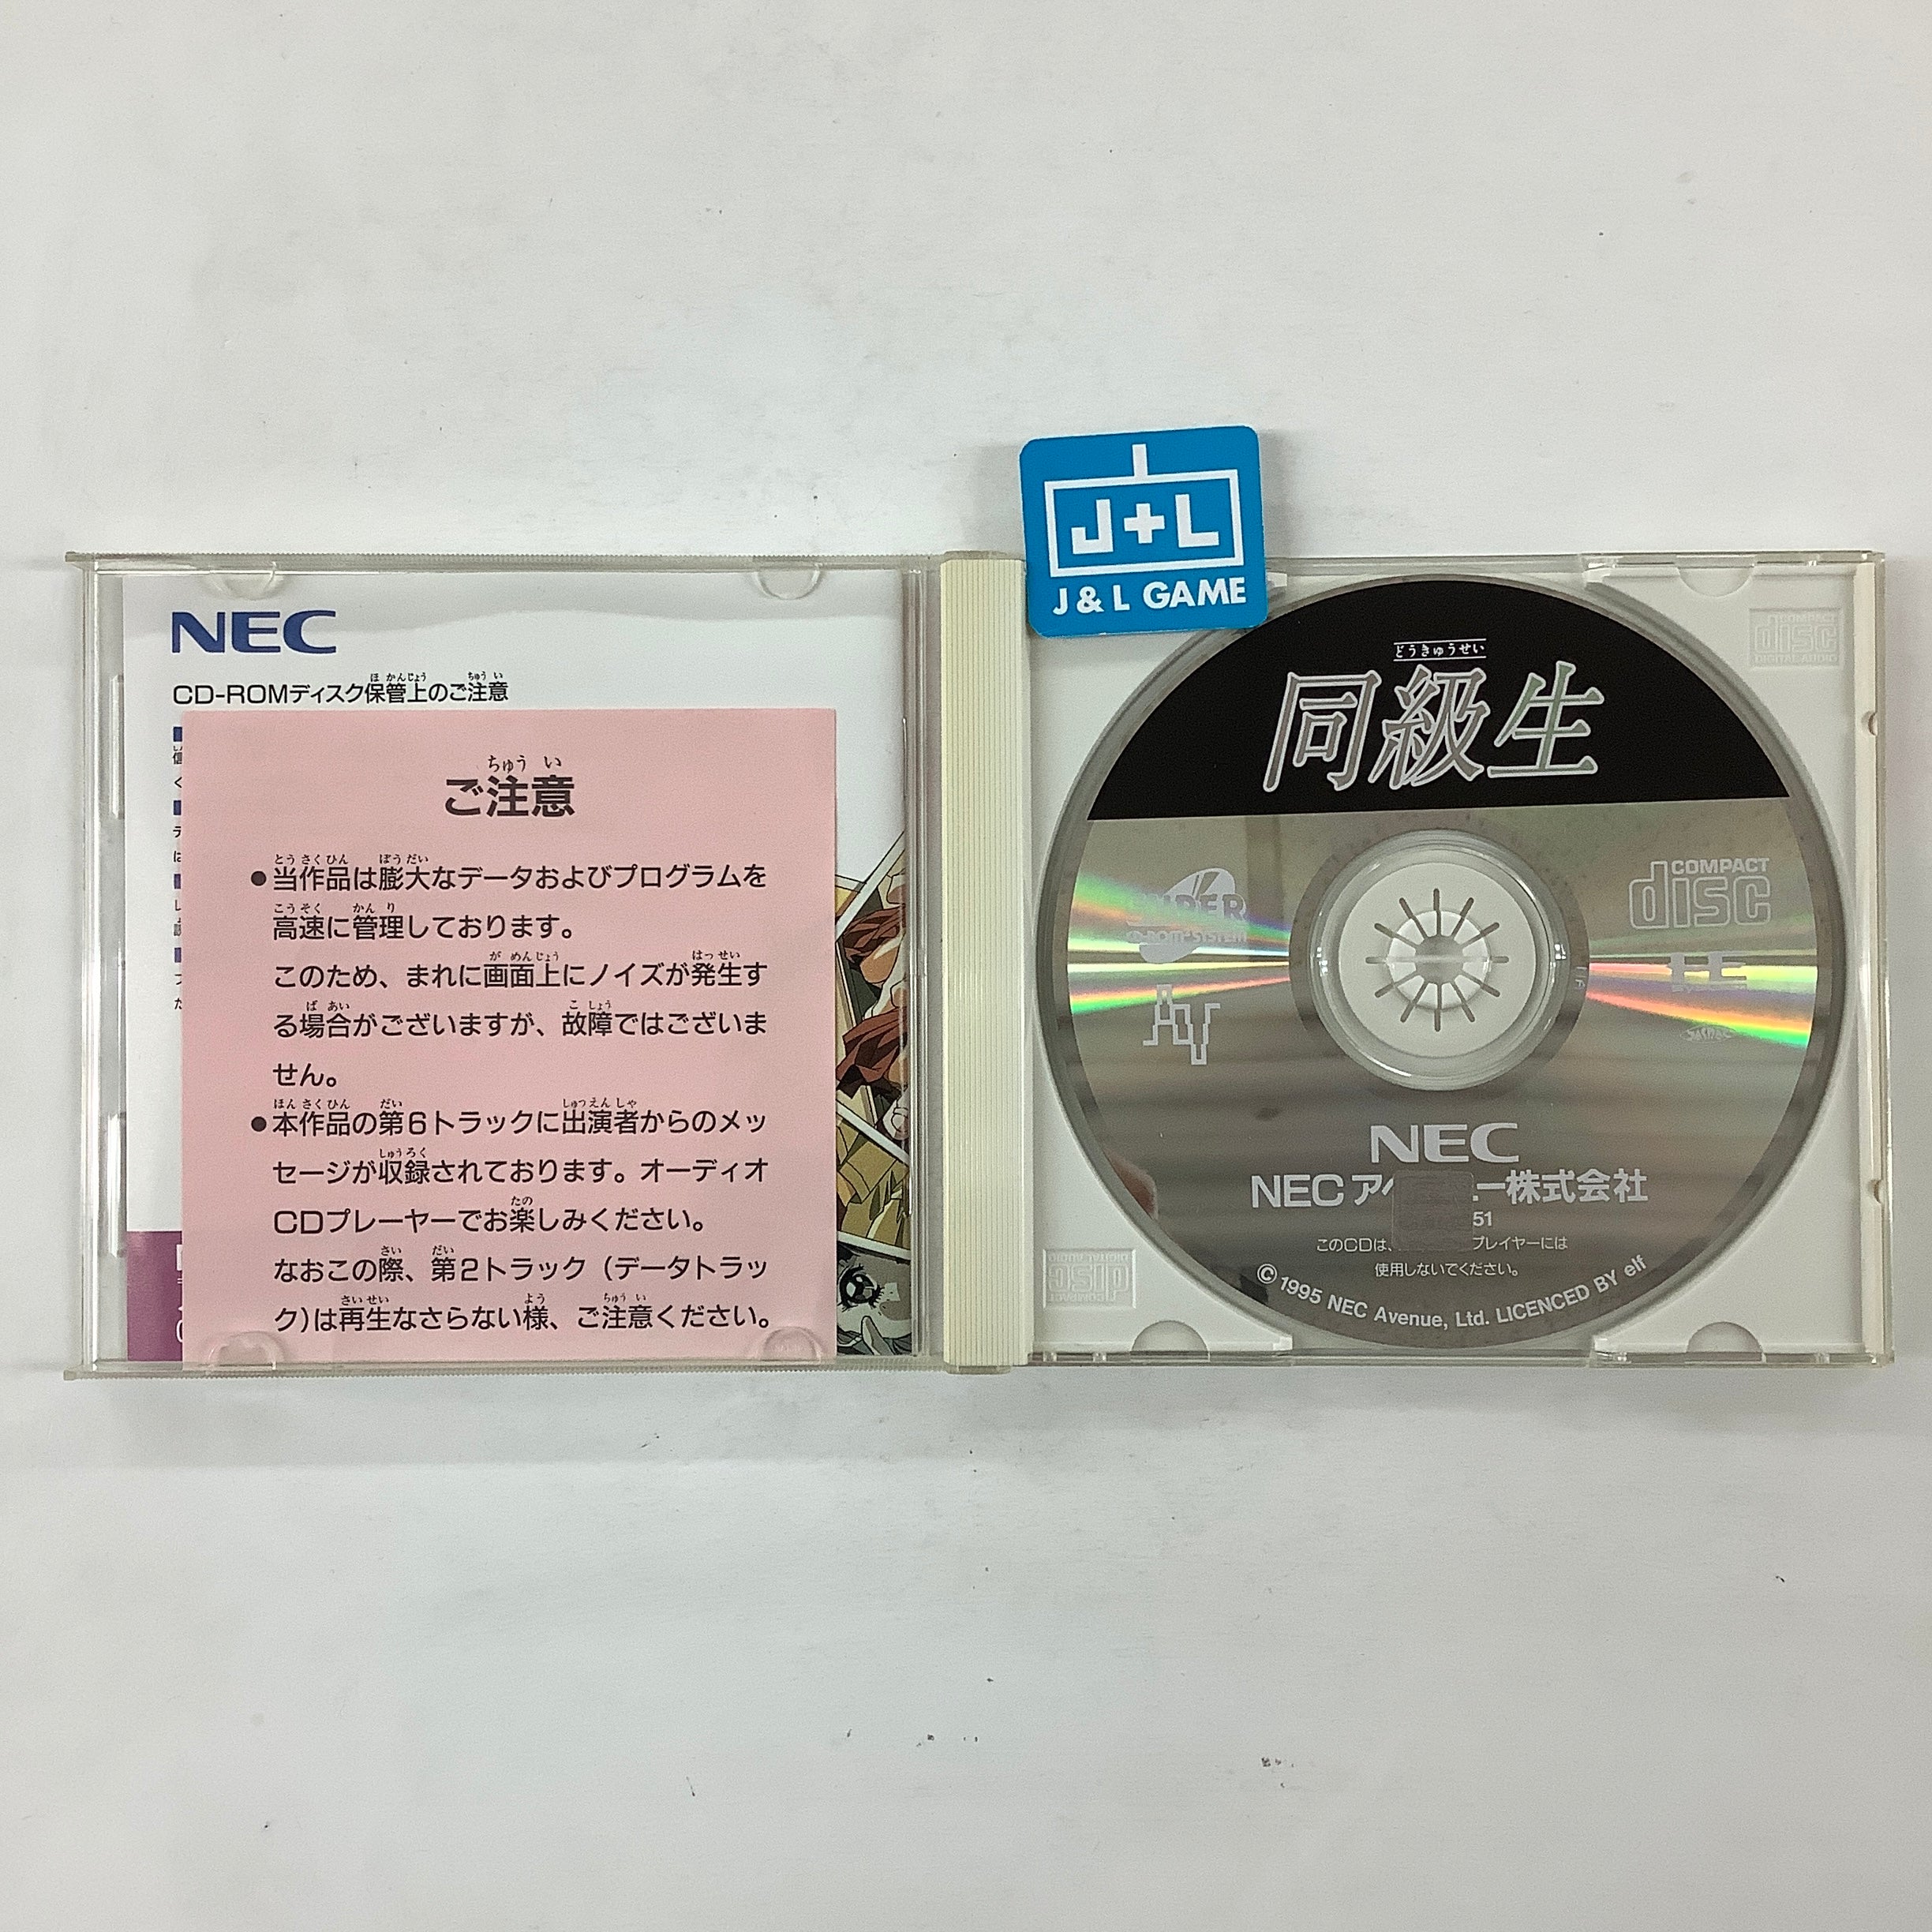 Doukyuusei - Turbo CD (Japanese Import) [Pre-Owned] Video Games NEC Interchannel   